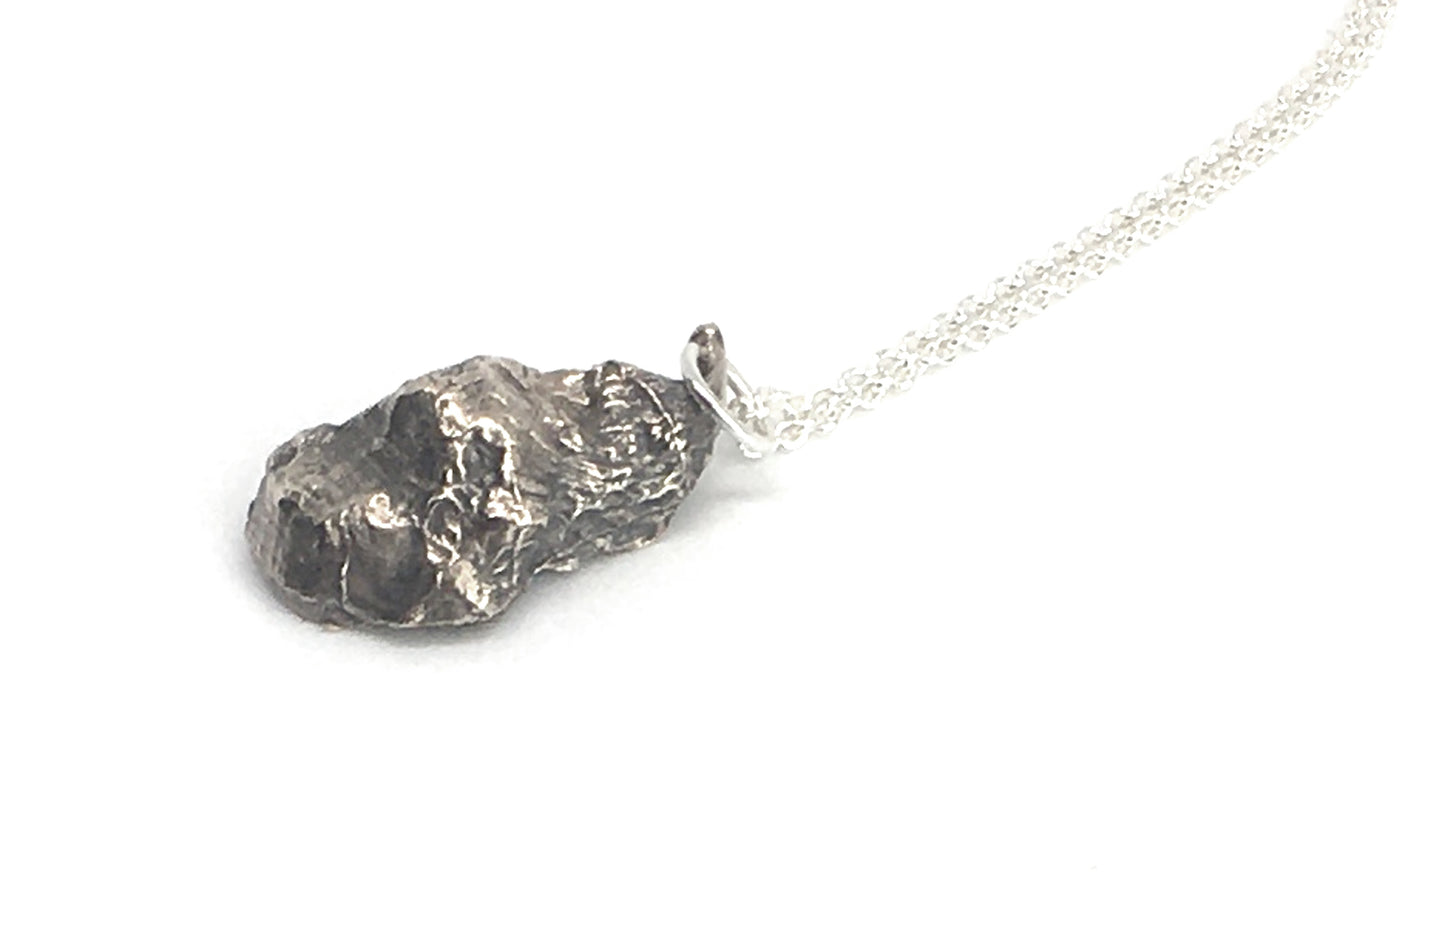 Sterling Silver Oyster Shell Pendant Necklace